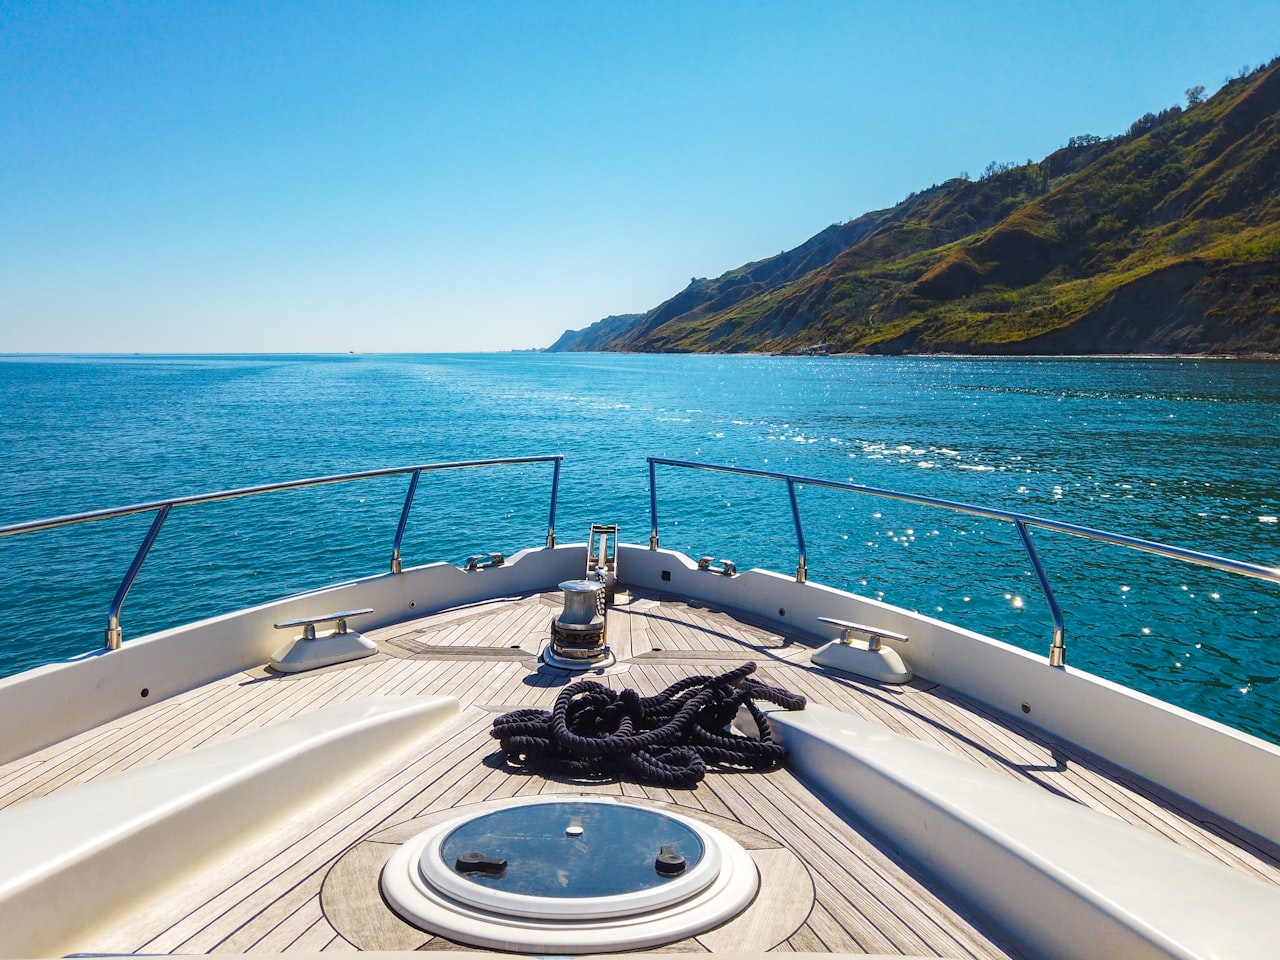 Yacht Charters and Cruises along Florida's Panhandle: A Day on the Water